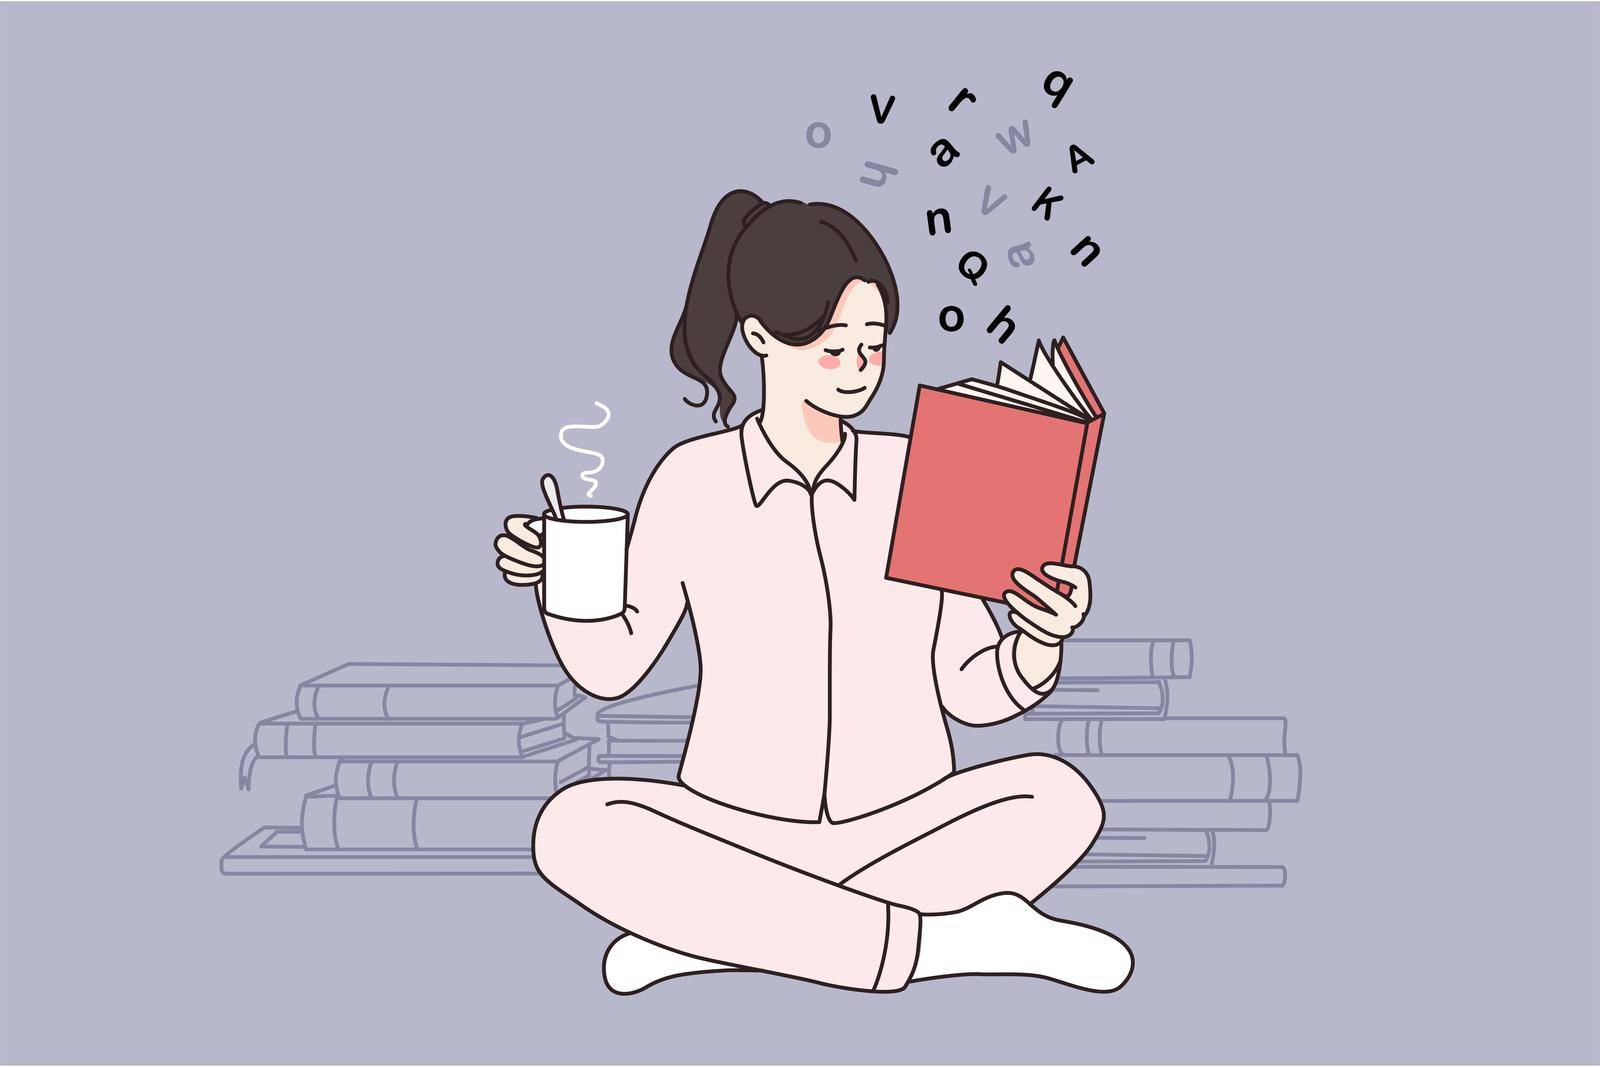 Leisure and relax activity concept. Young smiling girl sitting on floor relaxing reading book drinking tea or coffee vector illustration